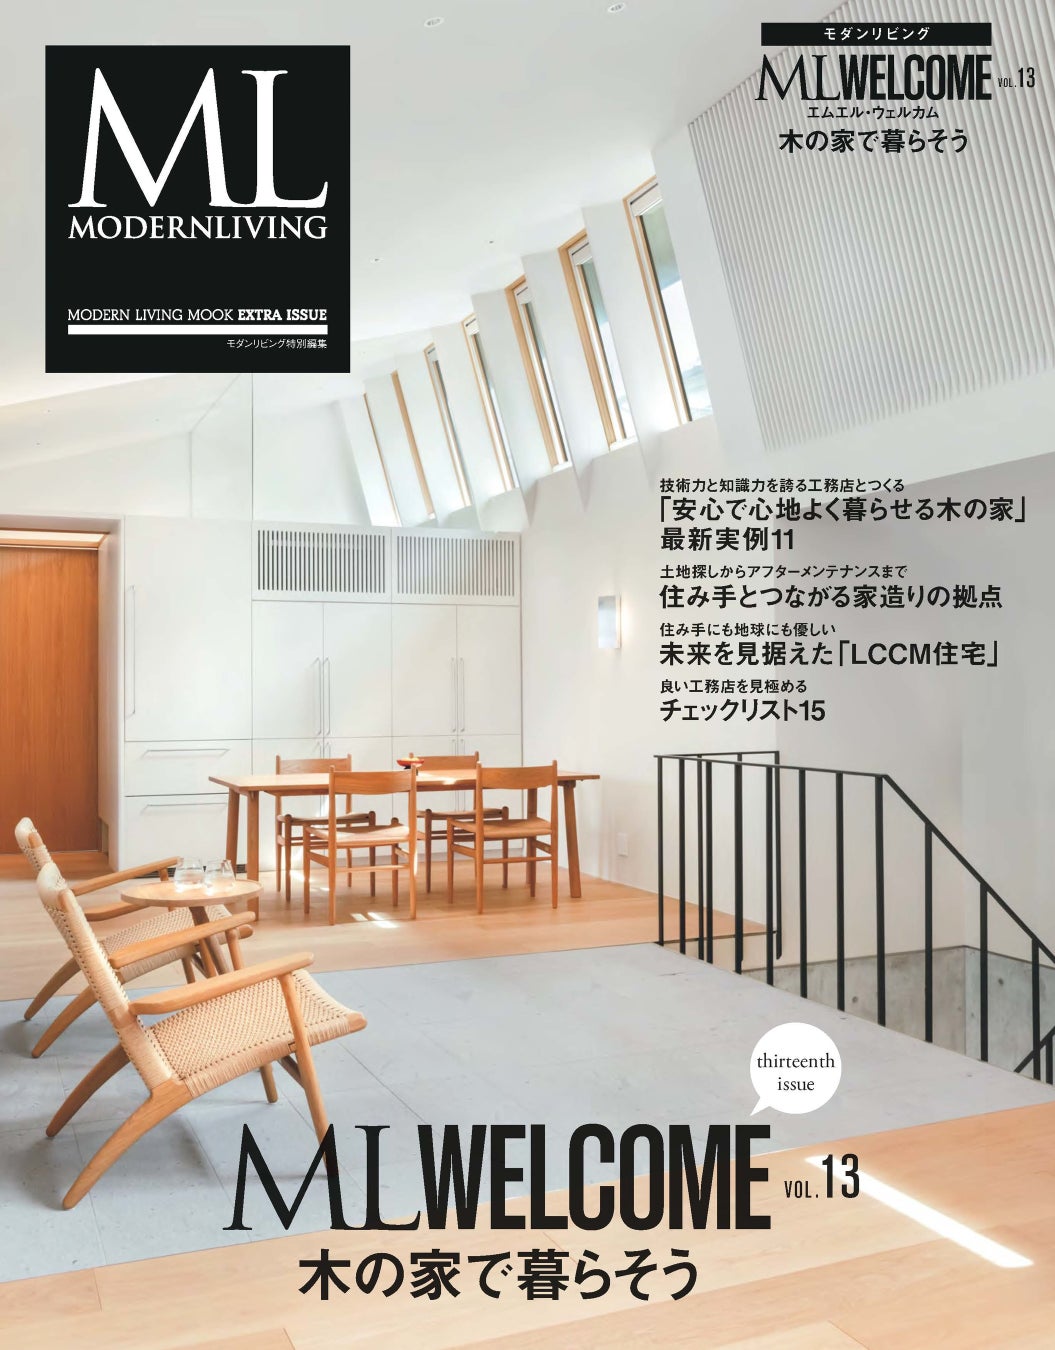 『ML WELCOME木の家で暮らそう vol.13』　6月14日(火)発売　のサブ画像1_『ML WELCOME 木の家で暮らそうvol.13』 表紙